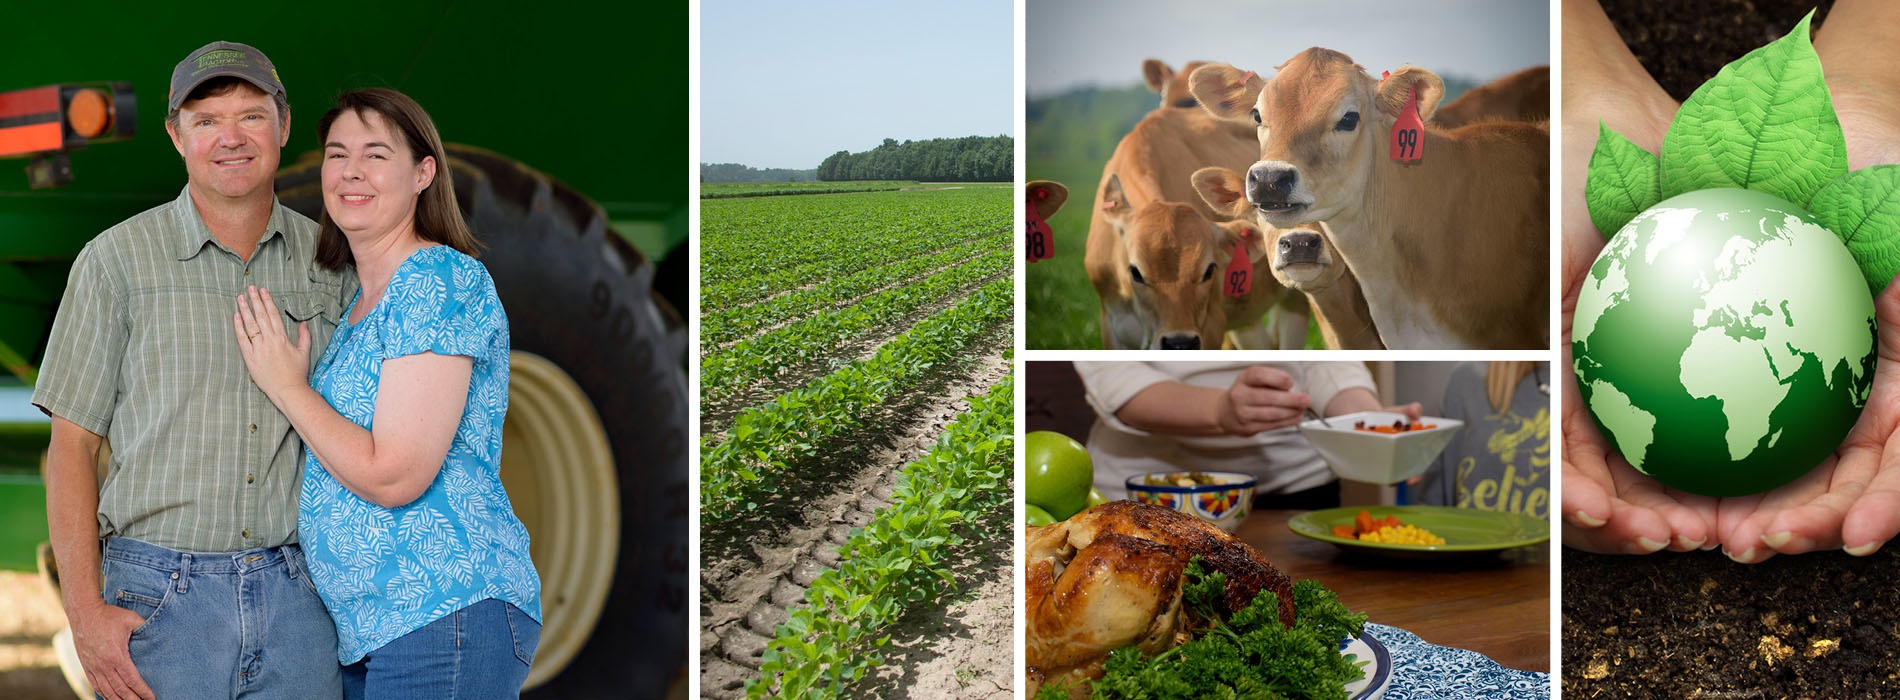 collage of farm to table images